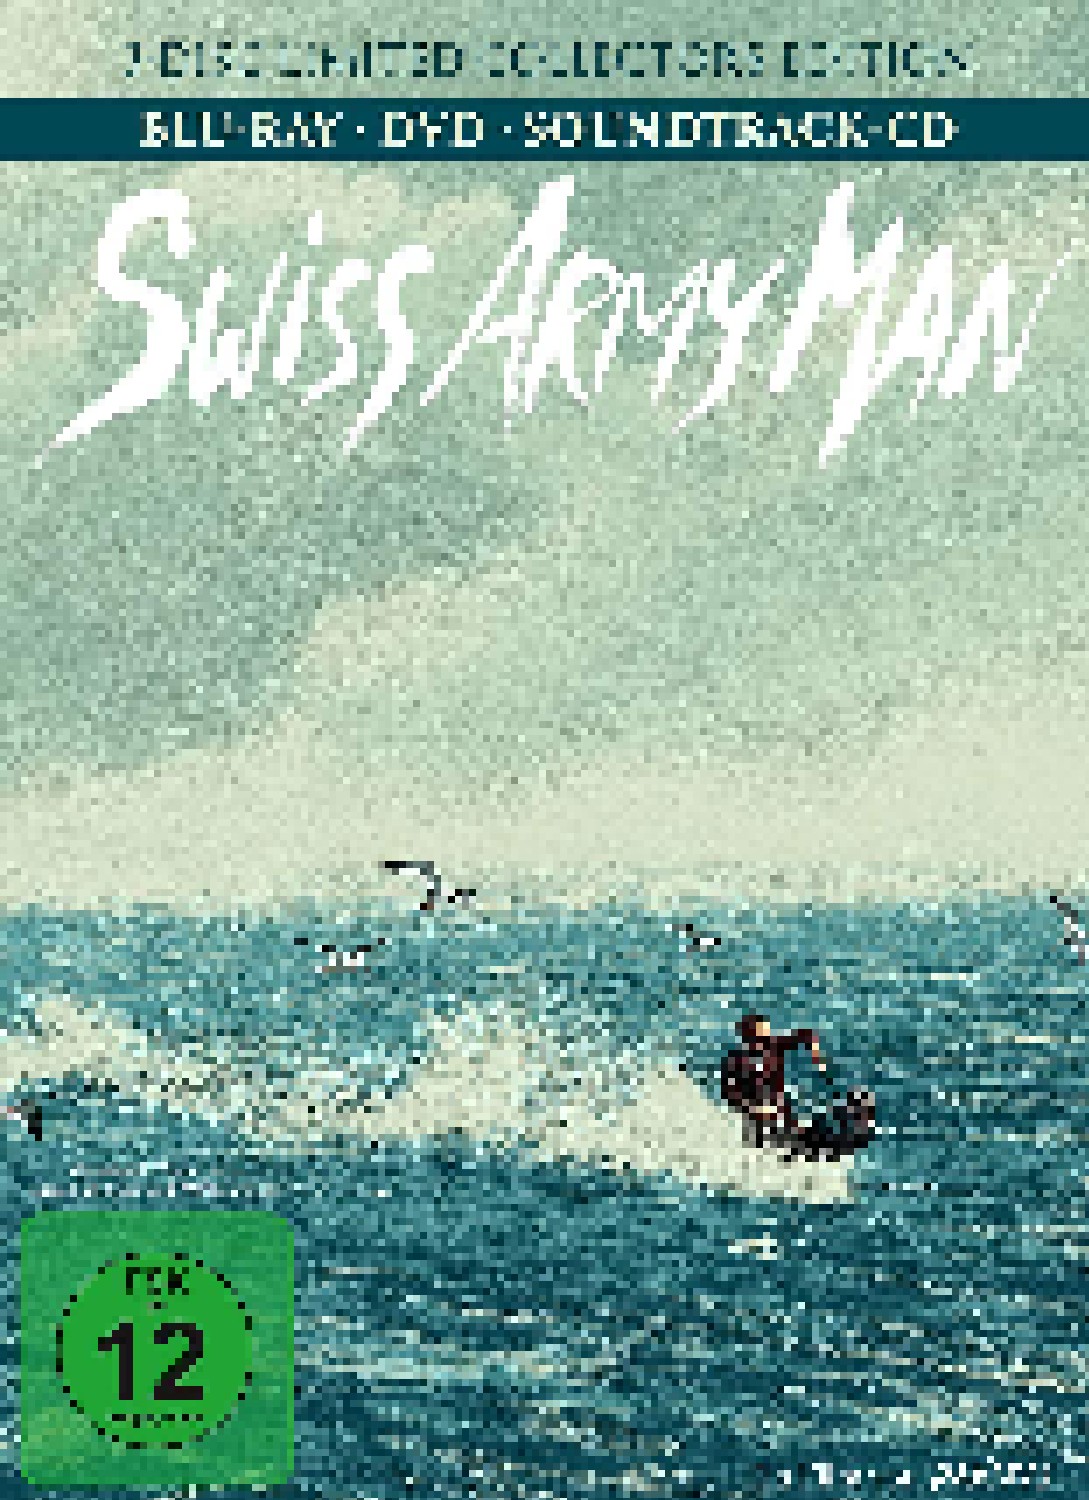 Swiss Army Man Original Motion Picture Soundtrack Cd Blu Ray Disc Dvd 2017 Limited